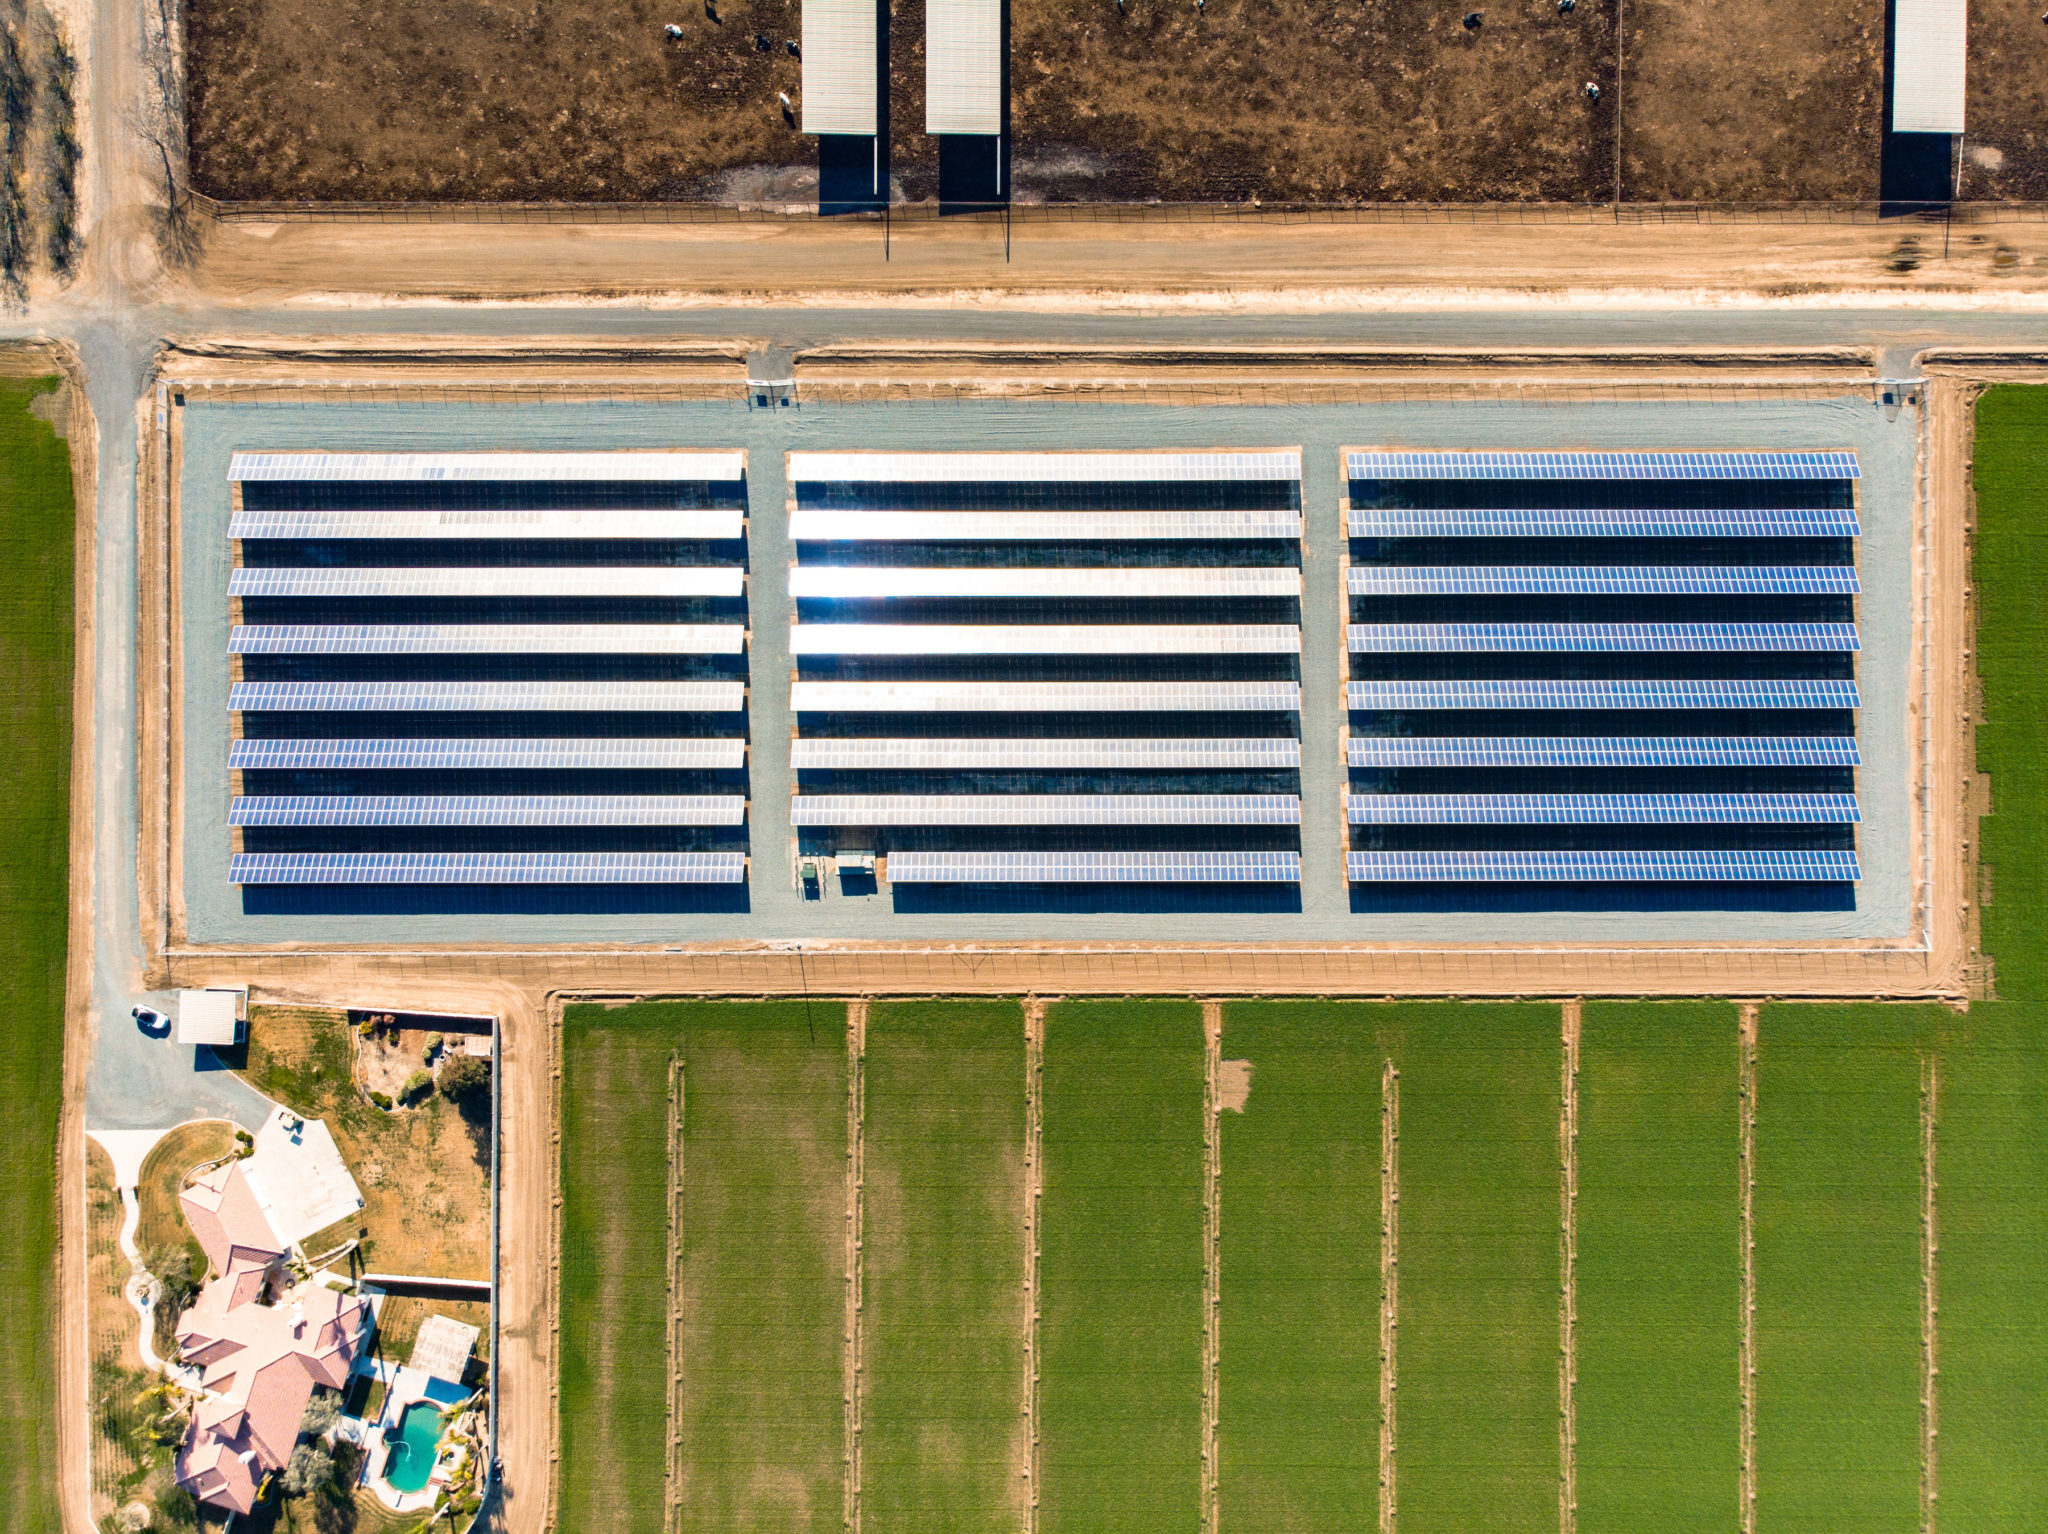 Aerial view of solar installation at Peter DeJong Dairy surrounded by green pasture land.